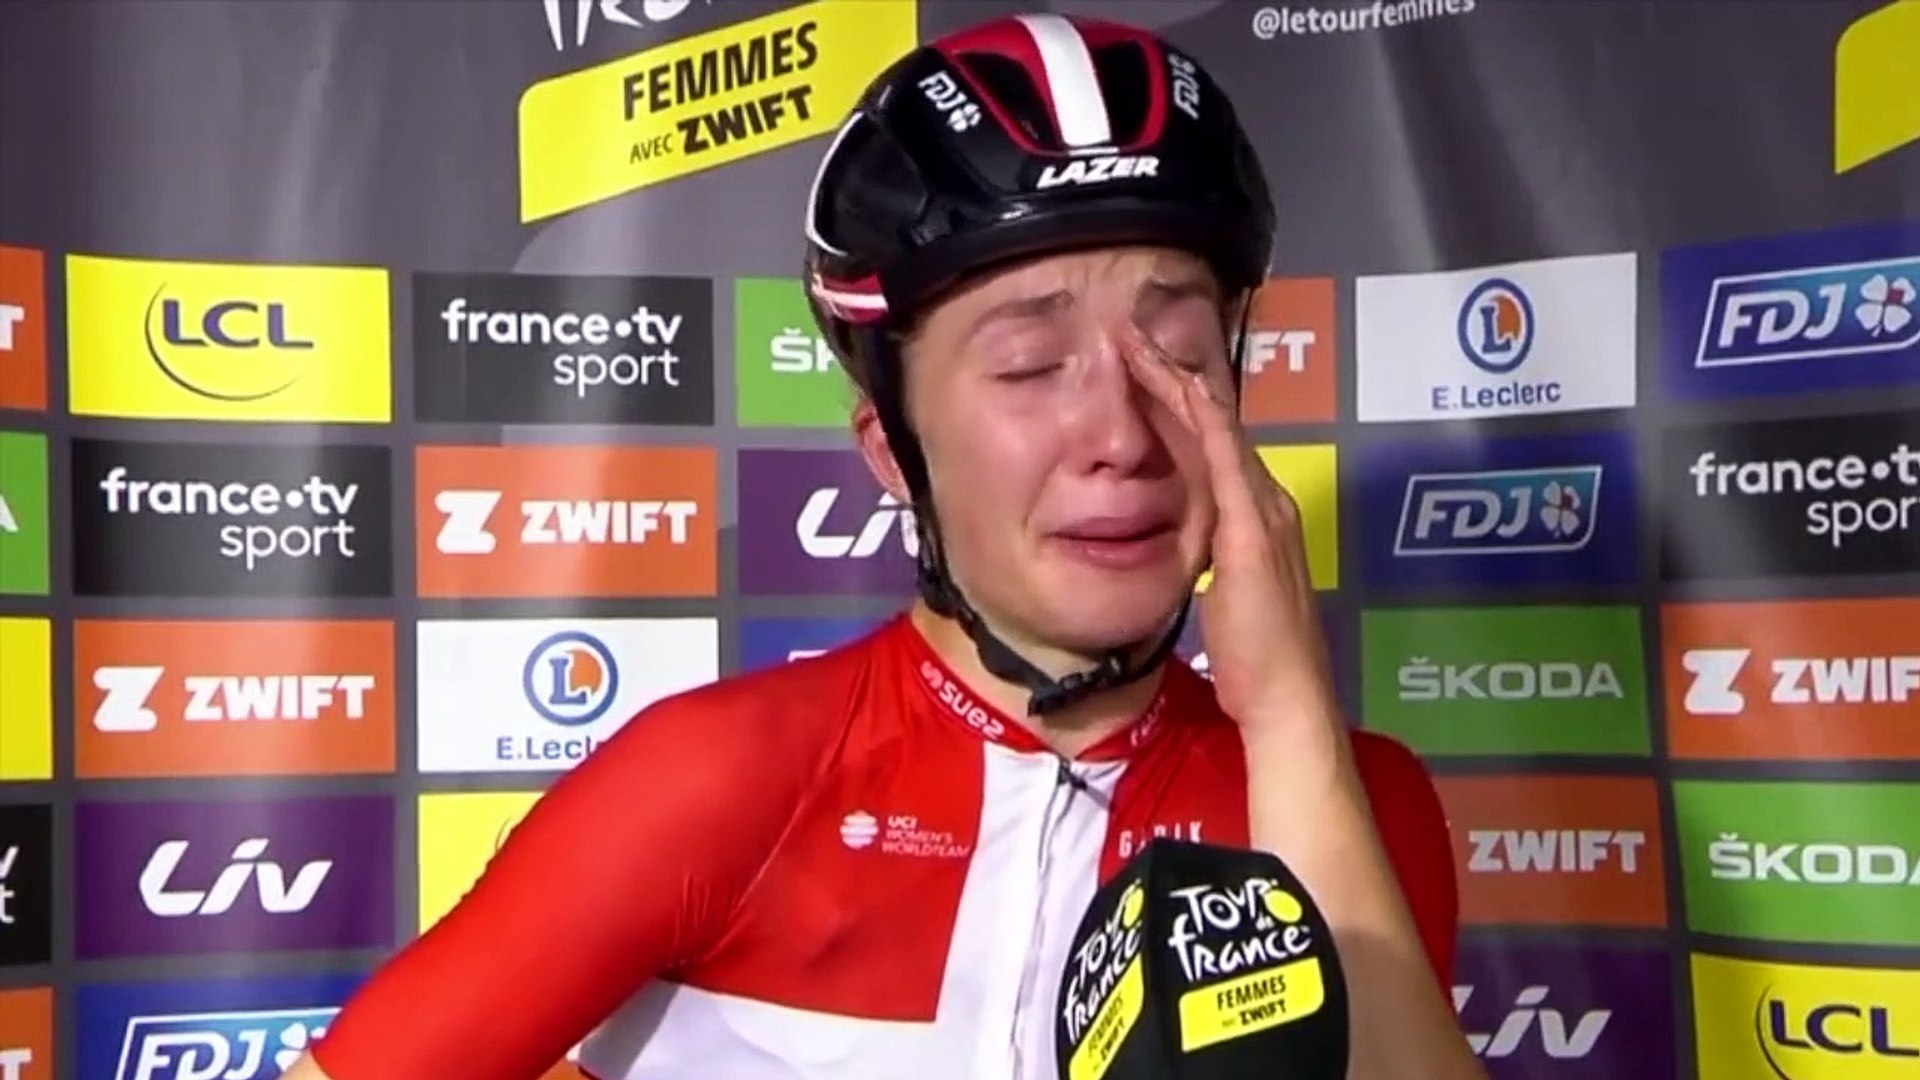 Tour de France Femmes 2022 - Cecilie Ludwig : "It's so amazing to come back  like this after that damn day yesterday" - Vidéo Dailymotion